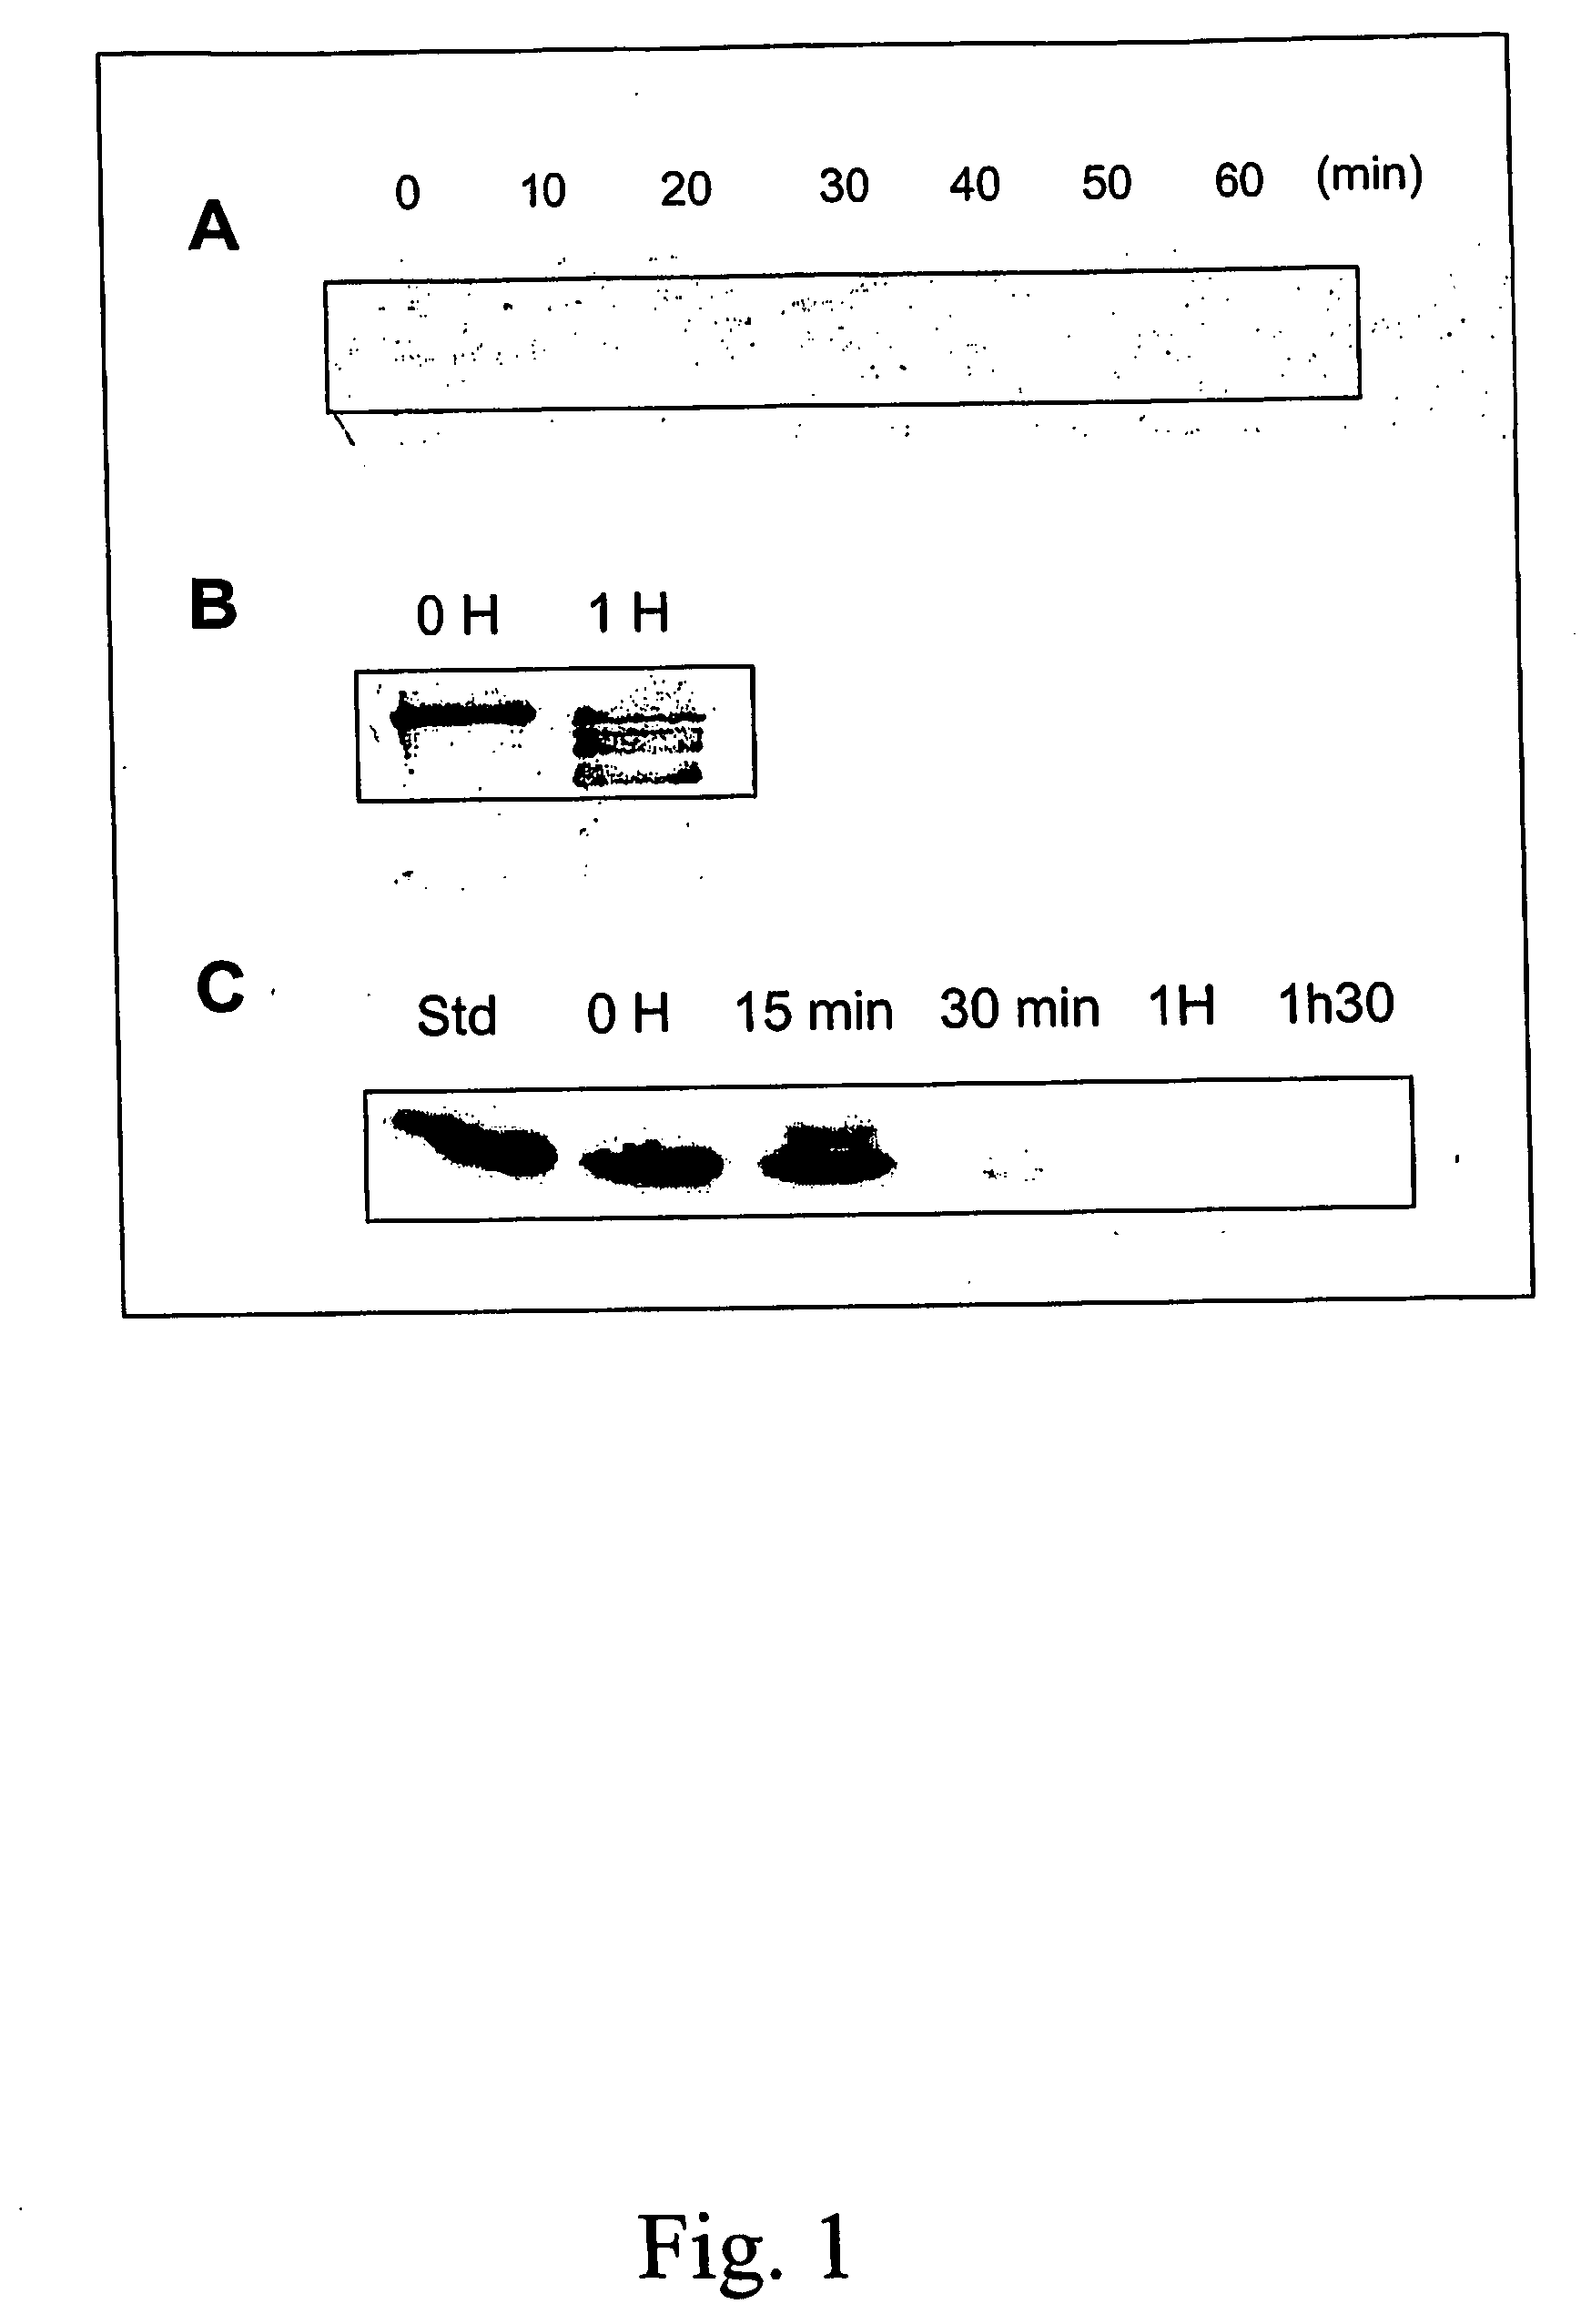 Method for enhancing yield of recombinant protein production from plants